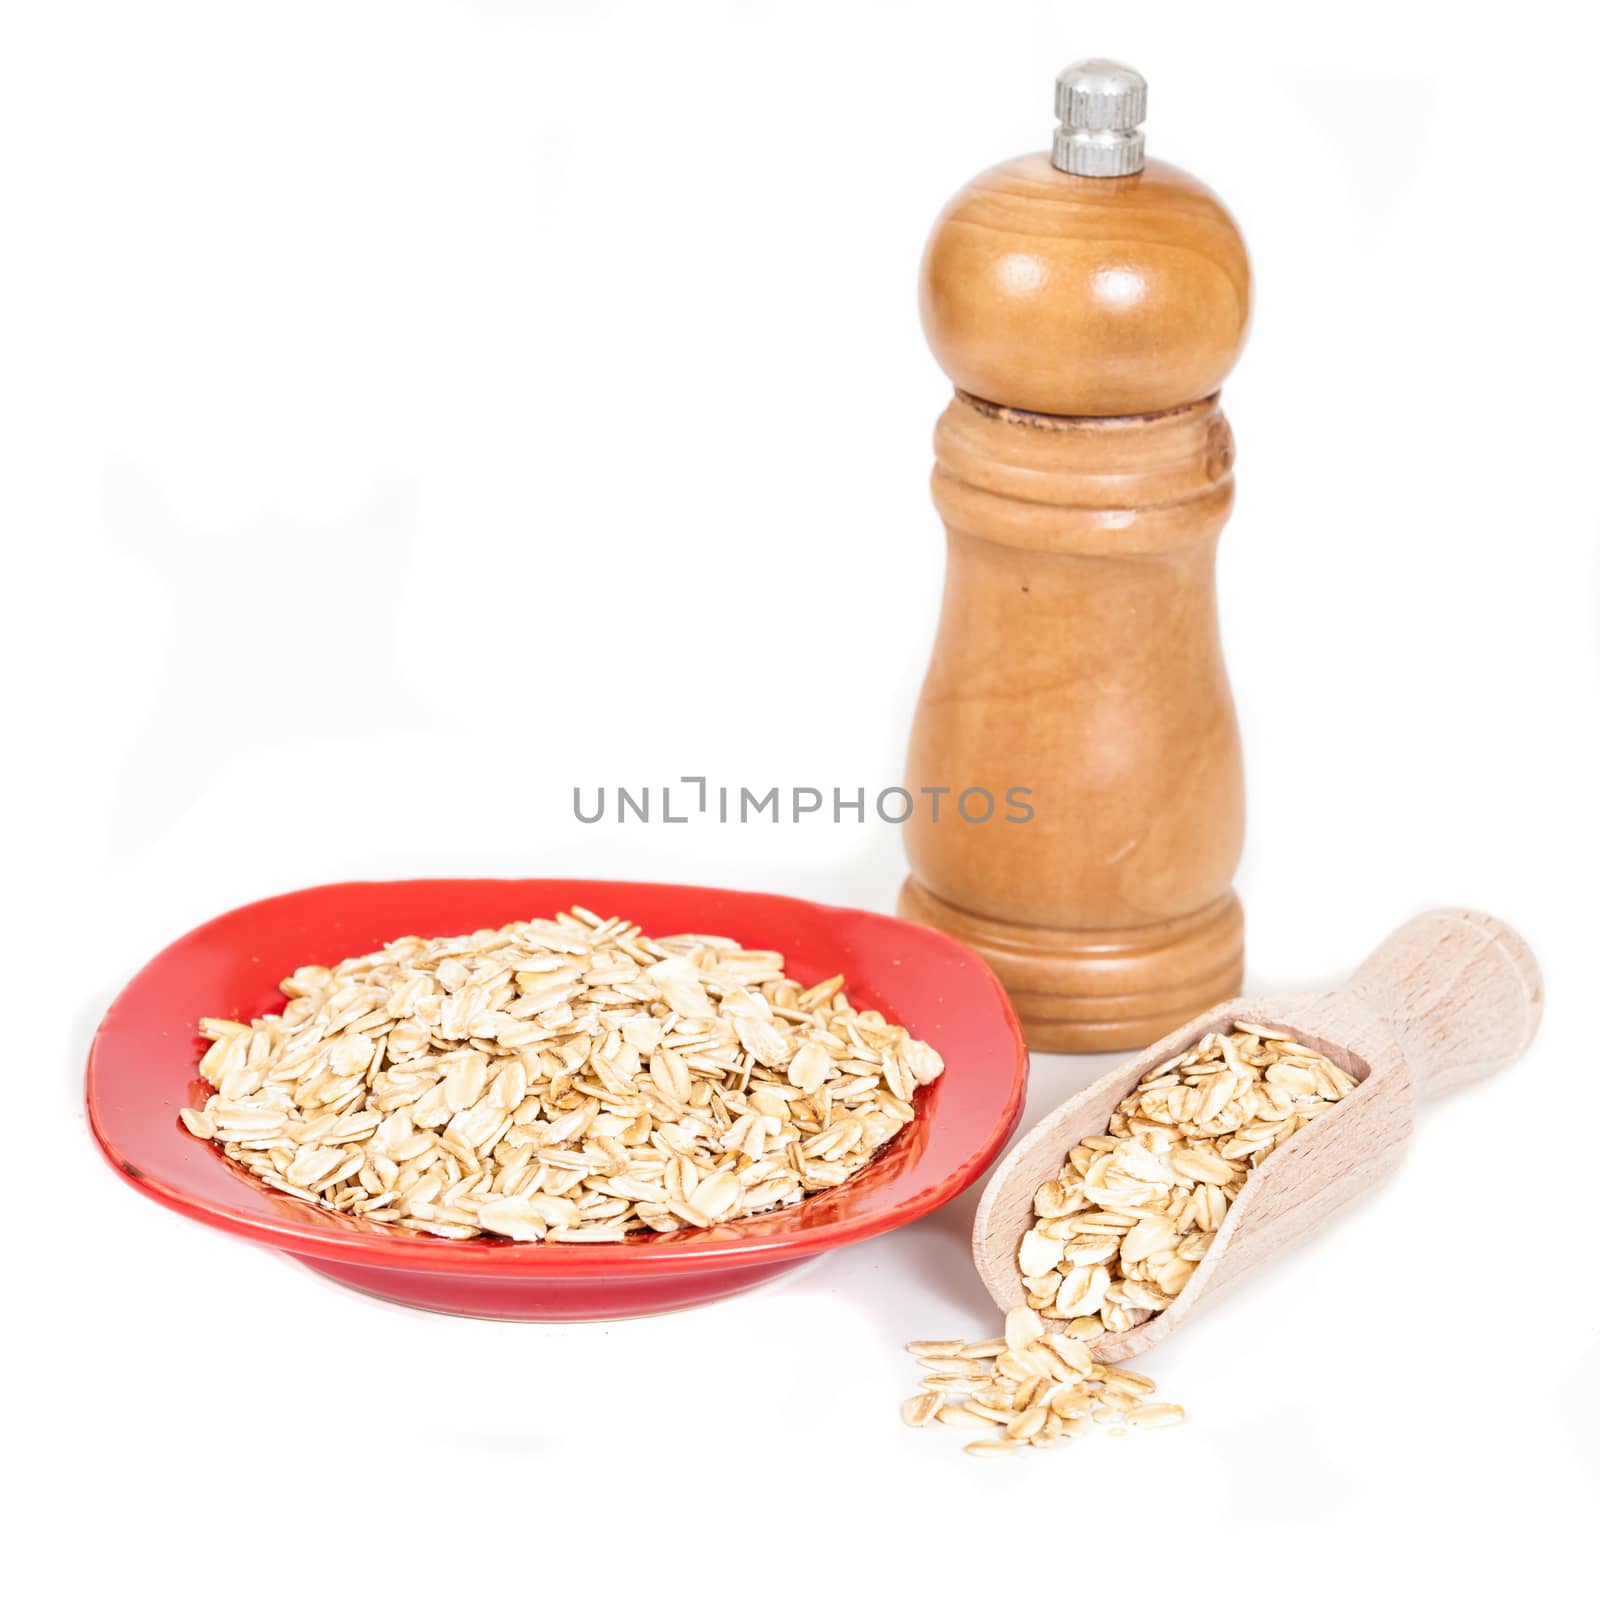 red dish  with oats flakes pile on white background. by amnarj2006